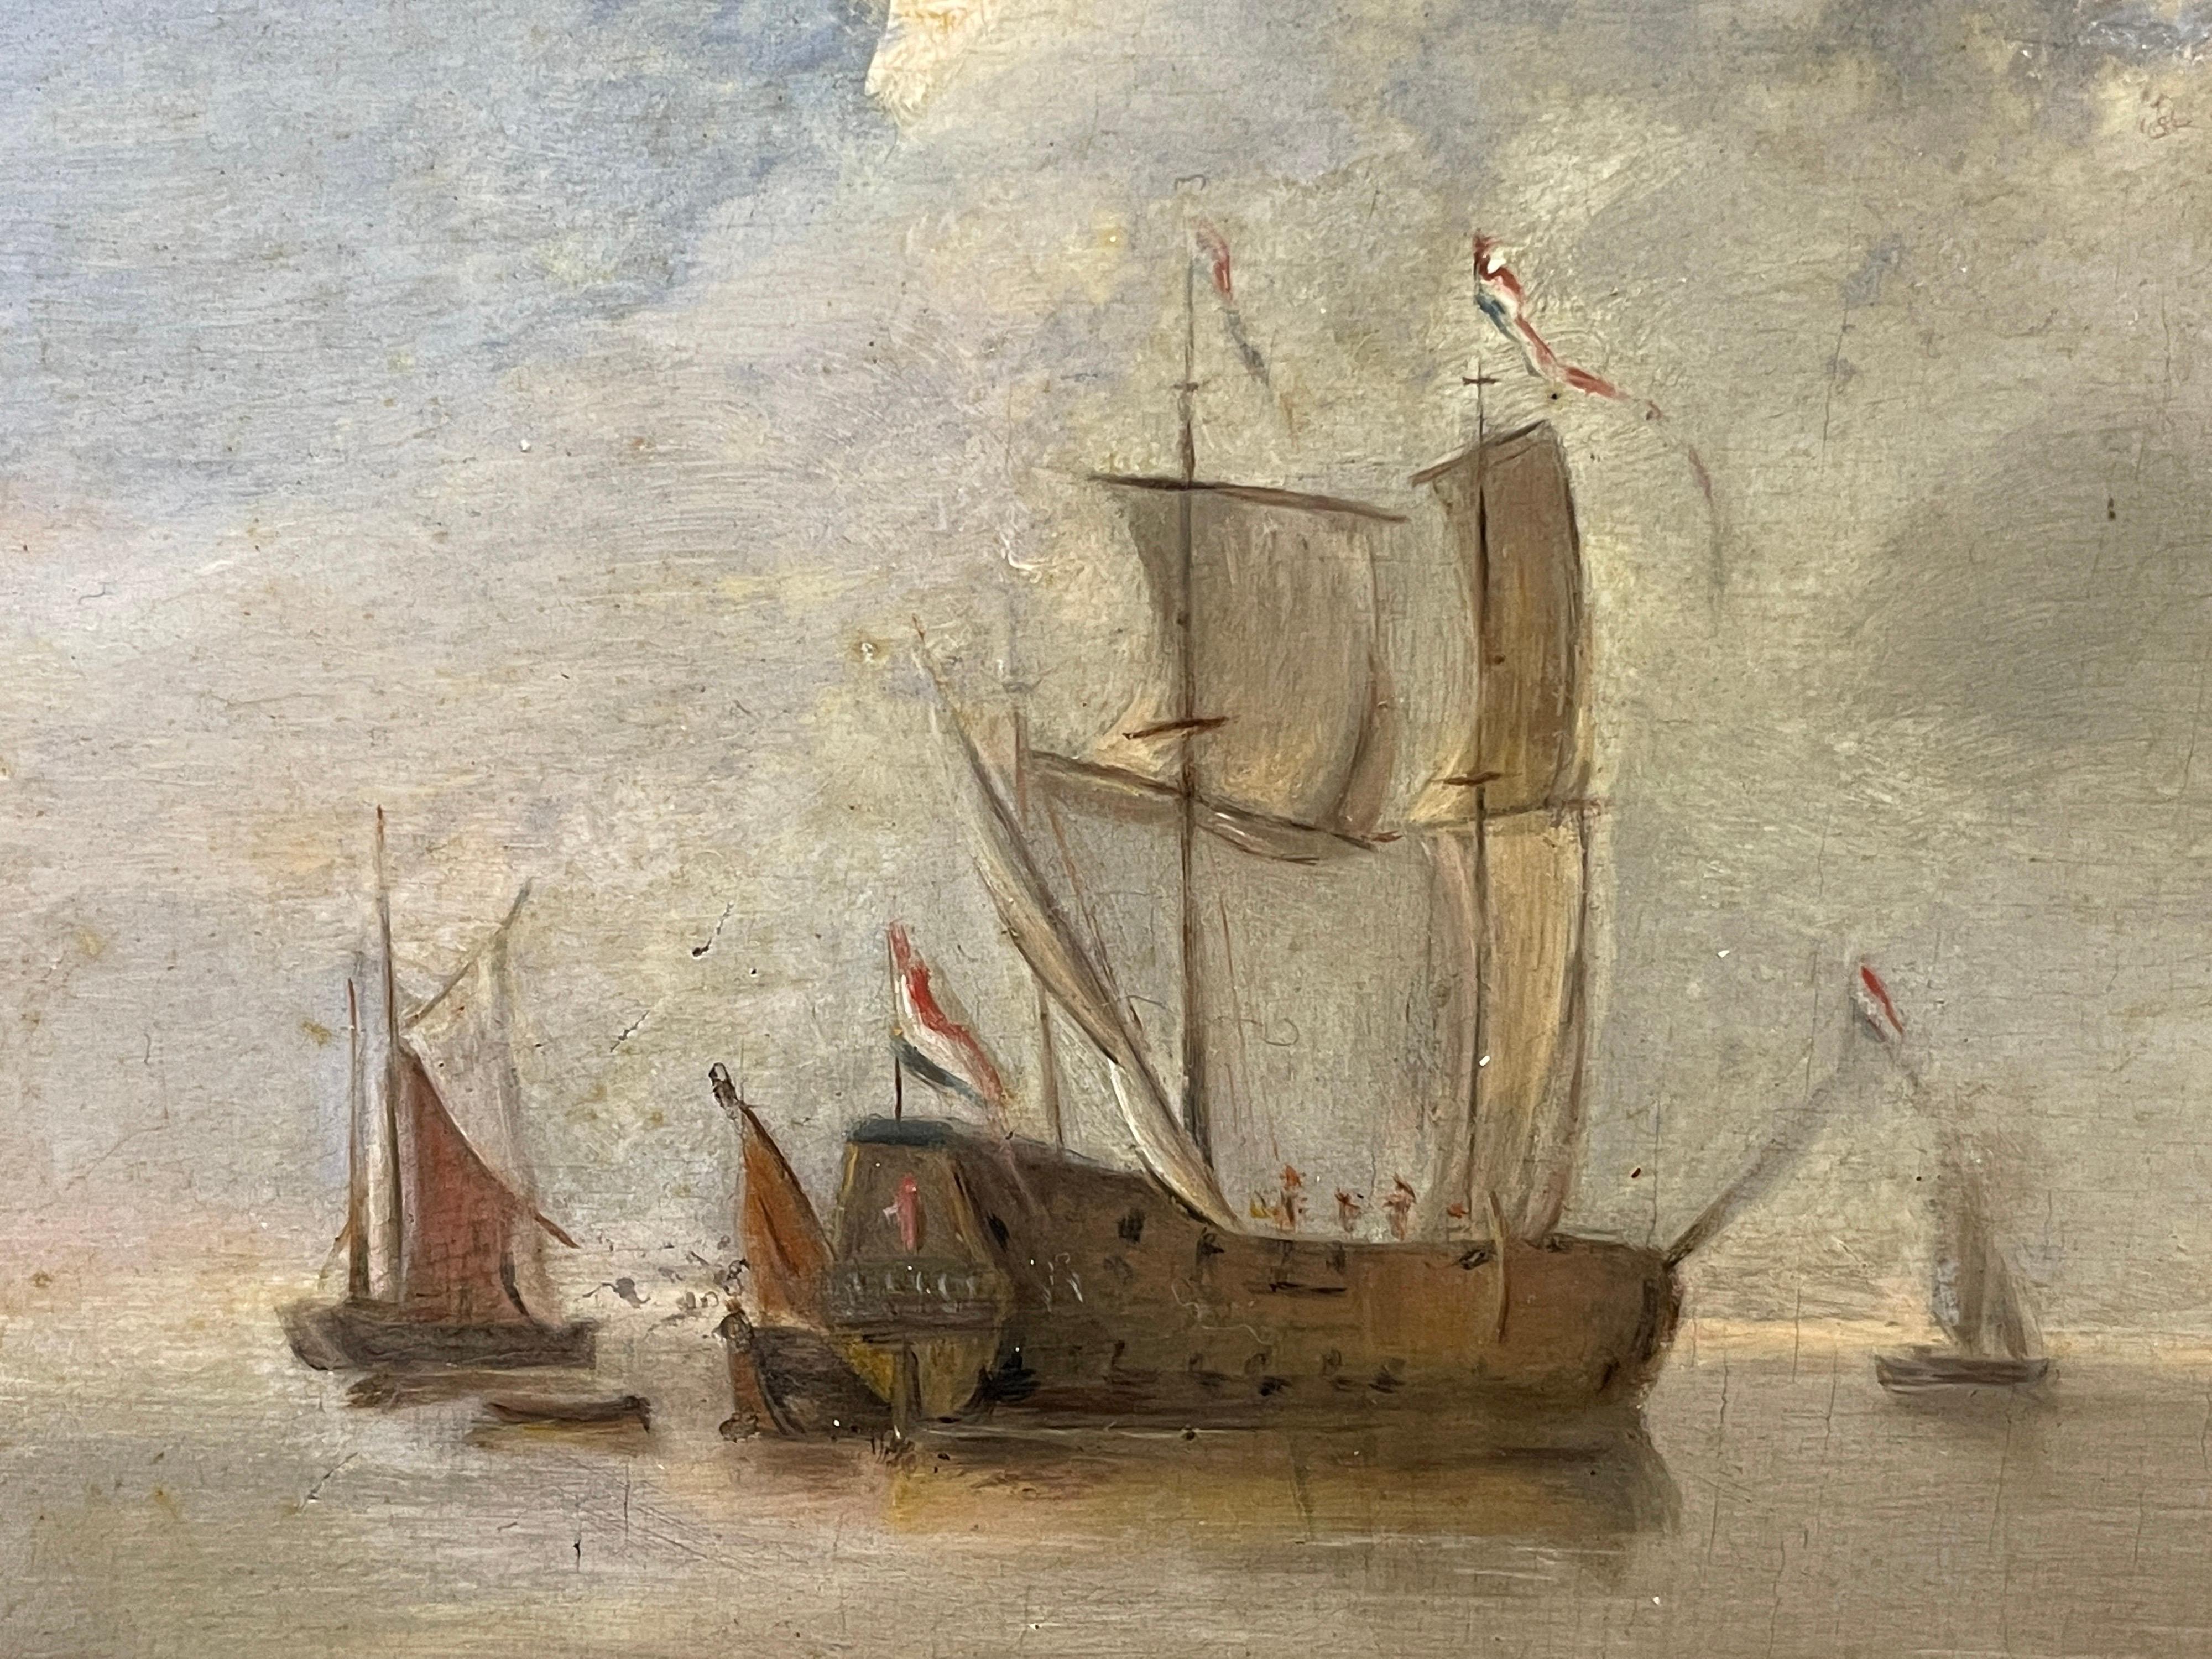 Shipping in Calm Waters
Dutch School, 18th century
oil painting on wood panel
panel: 10 x 12.75 inches
framed: 14 x 17 inches
condition: very good, minor evidence of former retouching to the sky, some discoloured varnish in places, all as one would